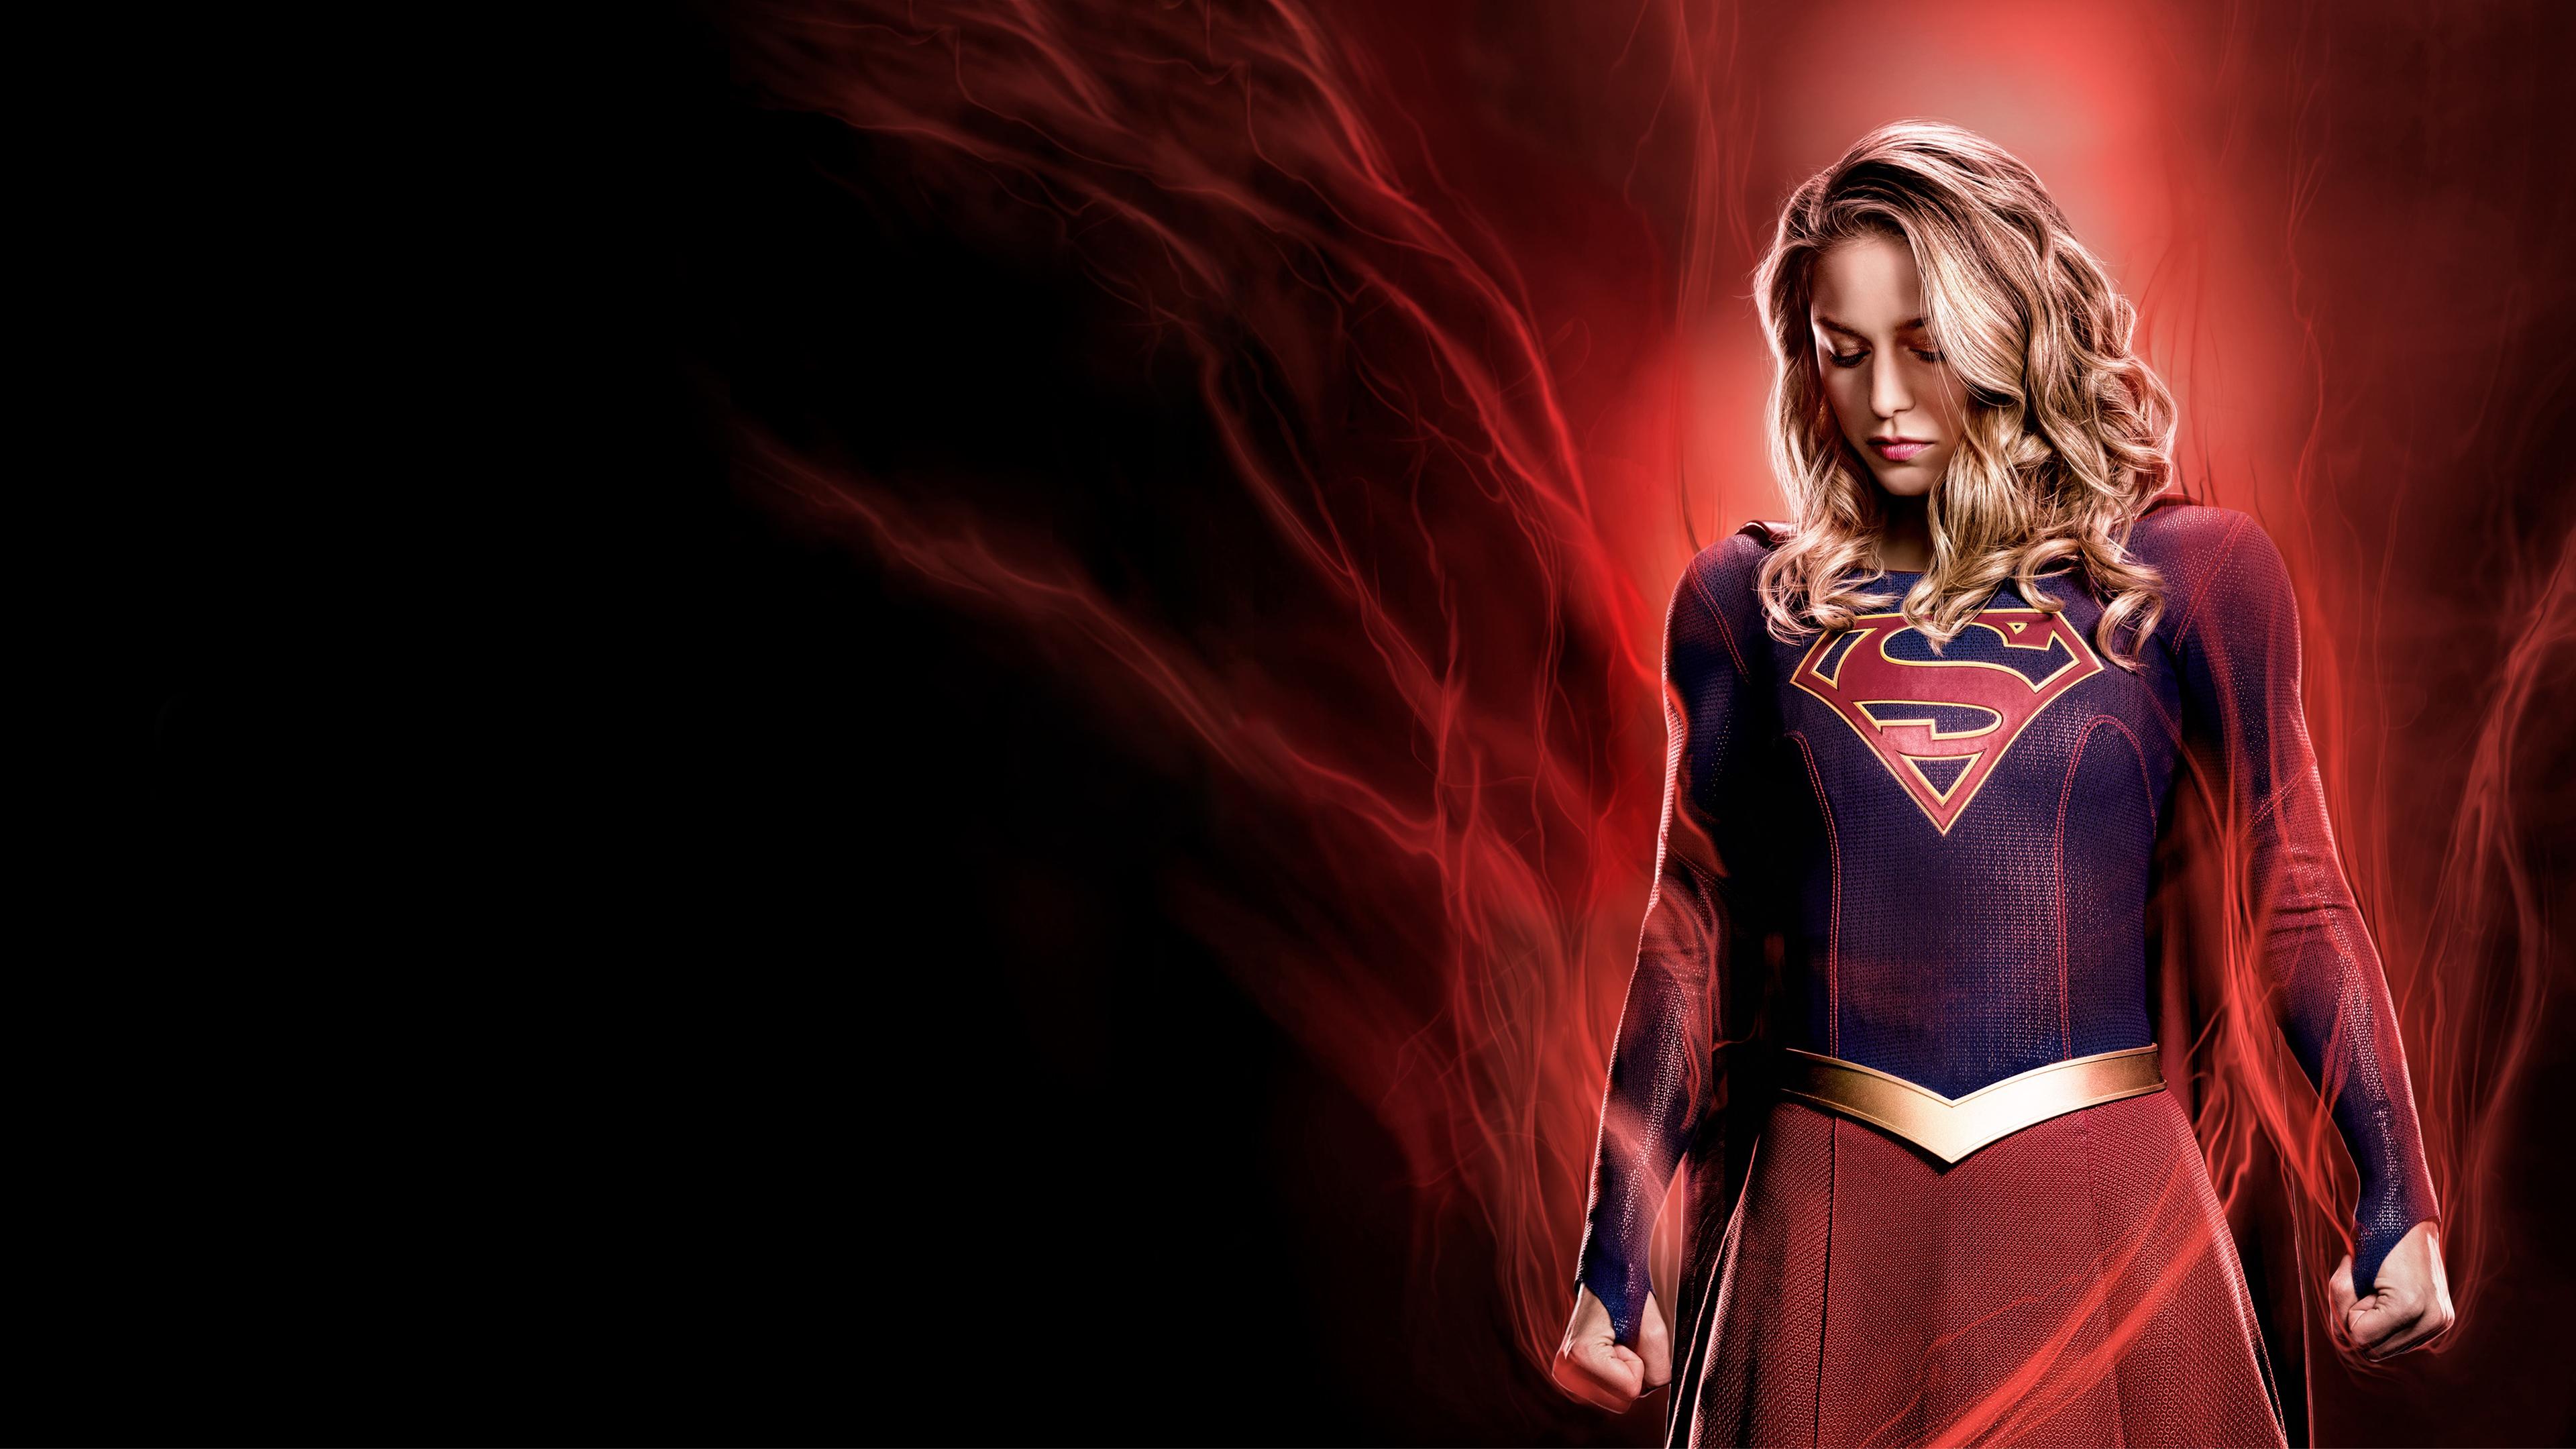 3840 x 2160 · jpeg - Supergirl Tv Series 4k Poster, HD Tv Shows, 4k Wallpapers, Images ...